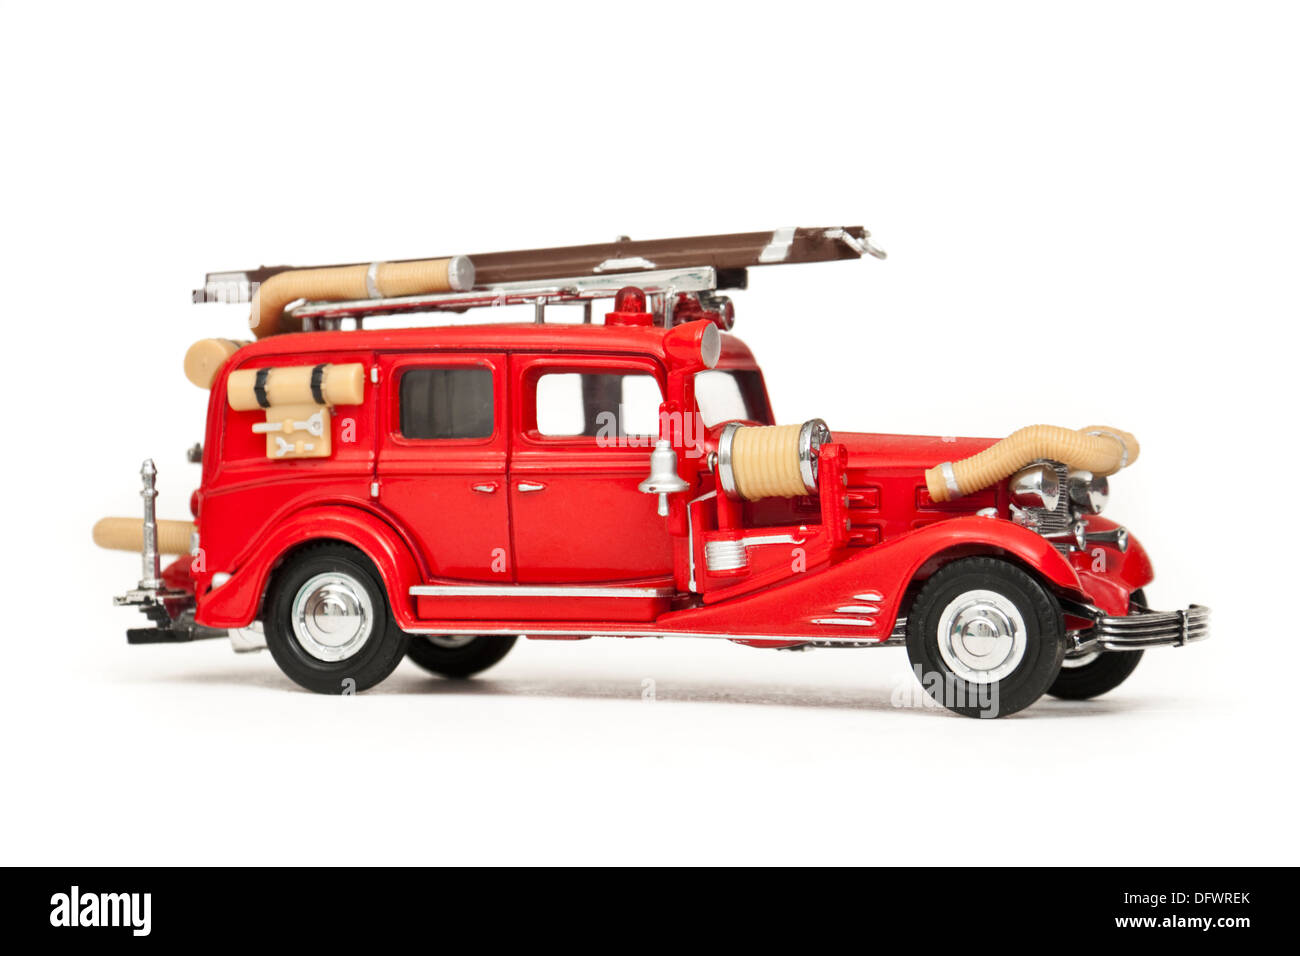 American vintage fire engine replica / diecast model toy by Matchbox Stock Photo